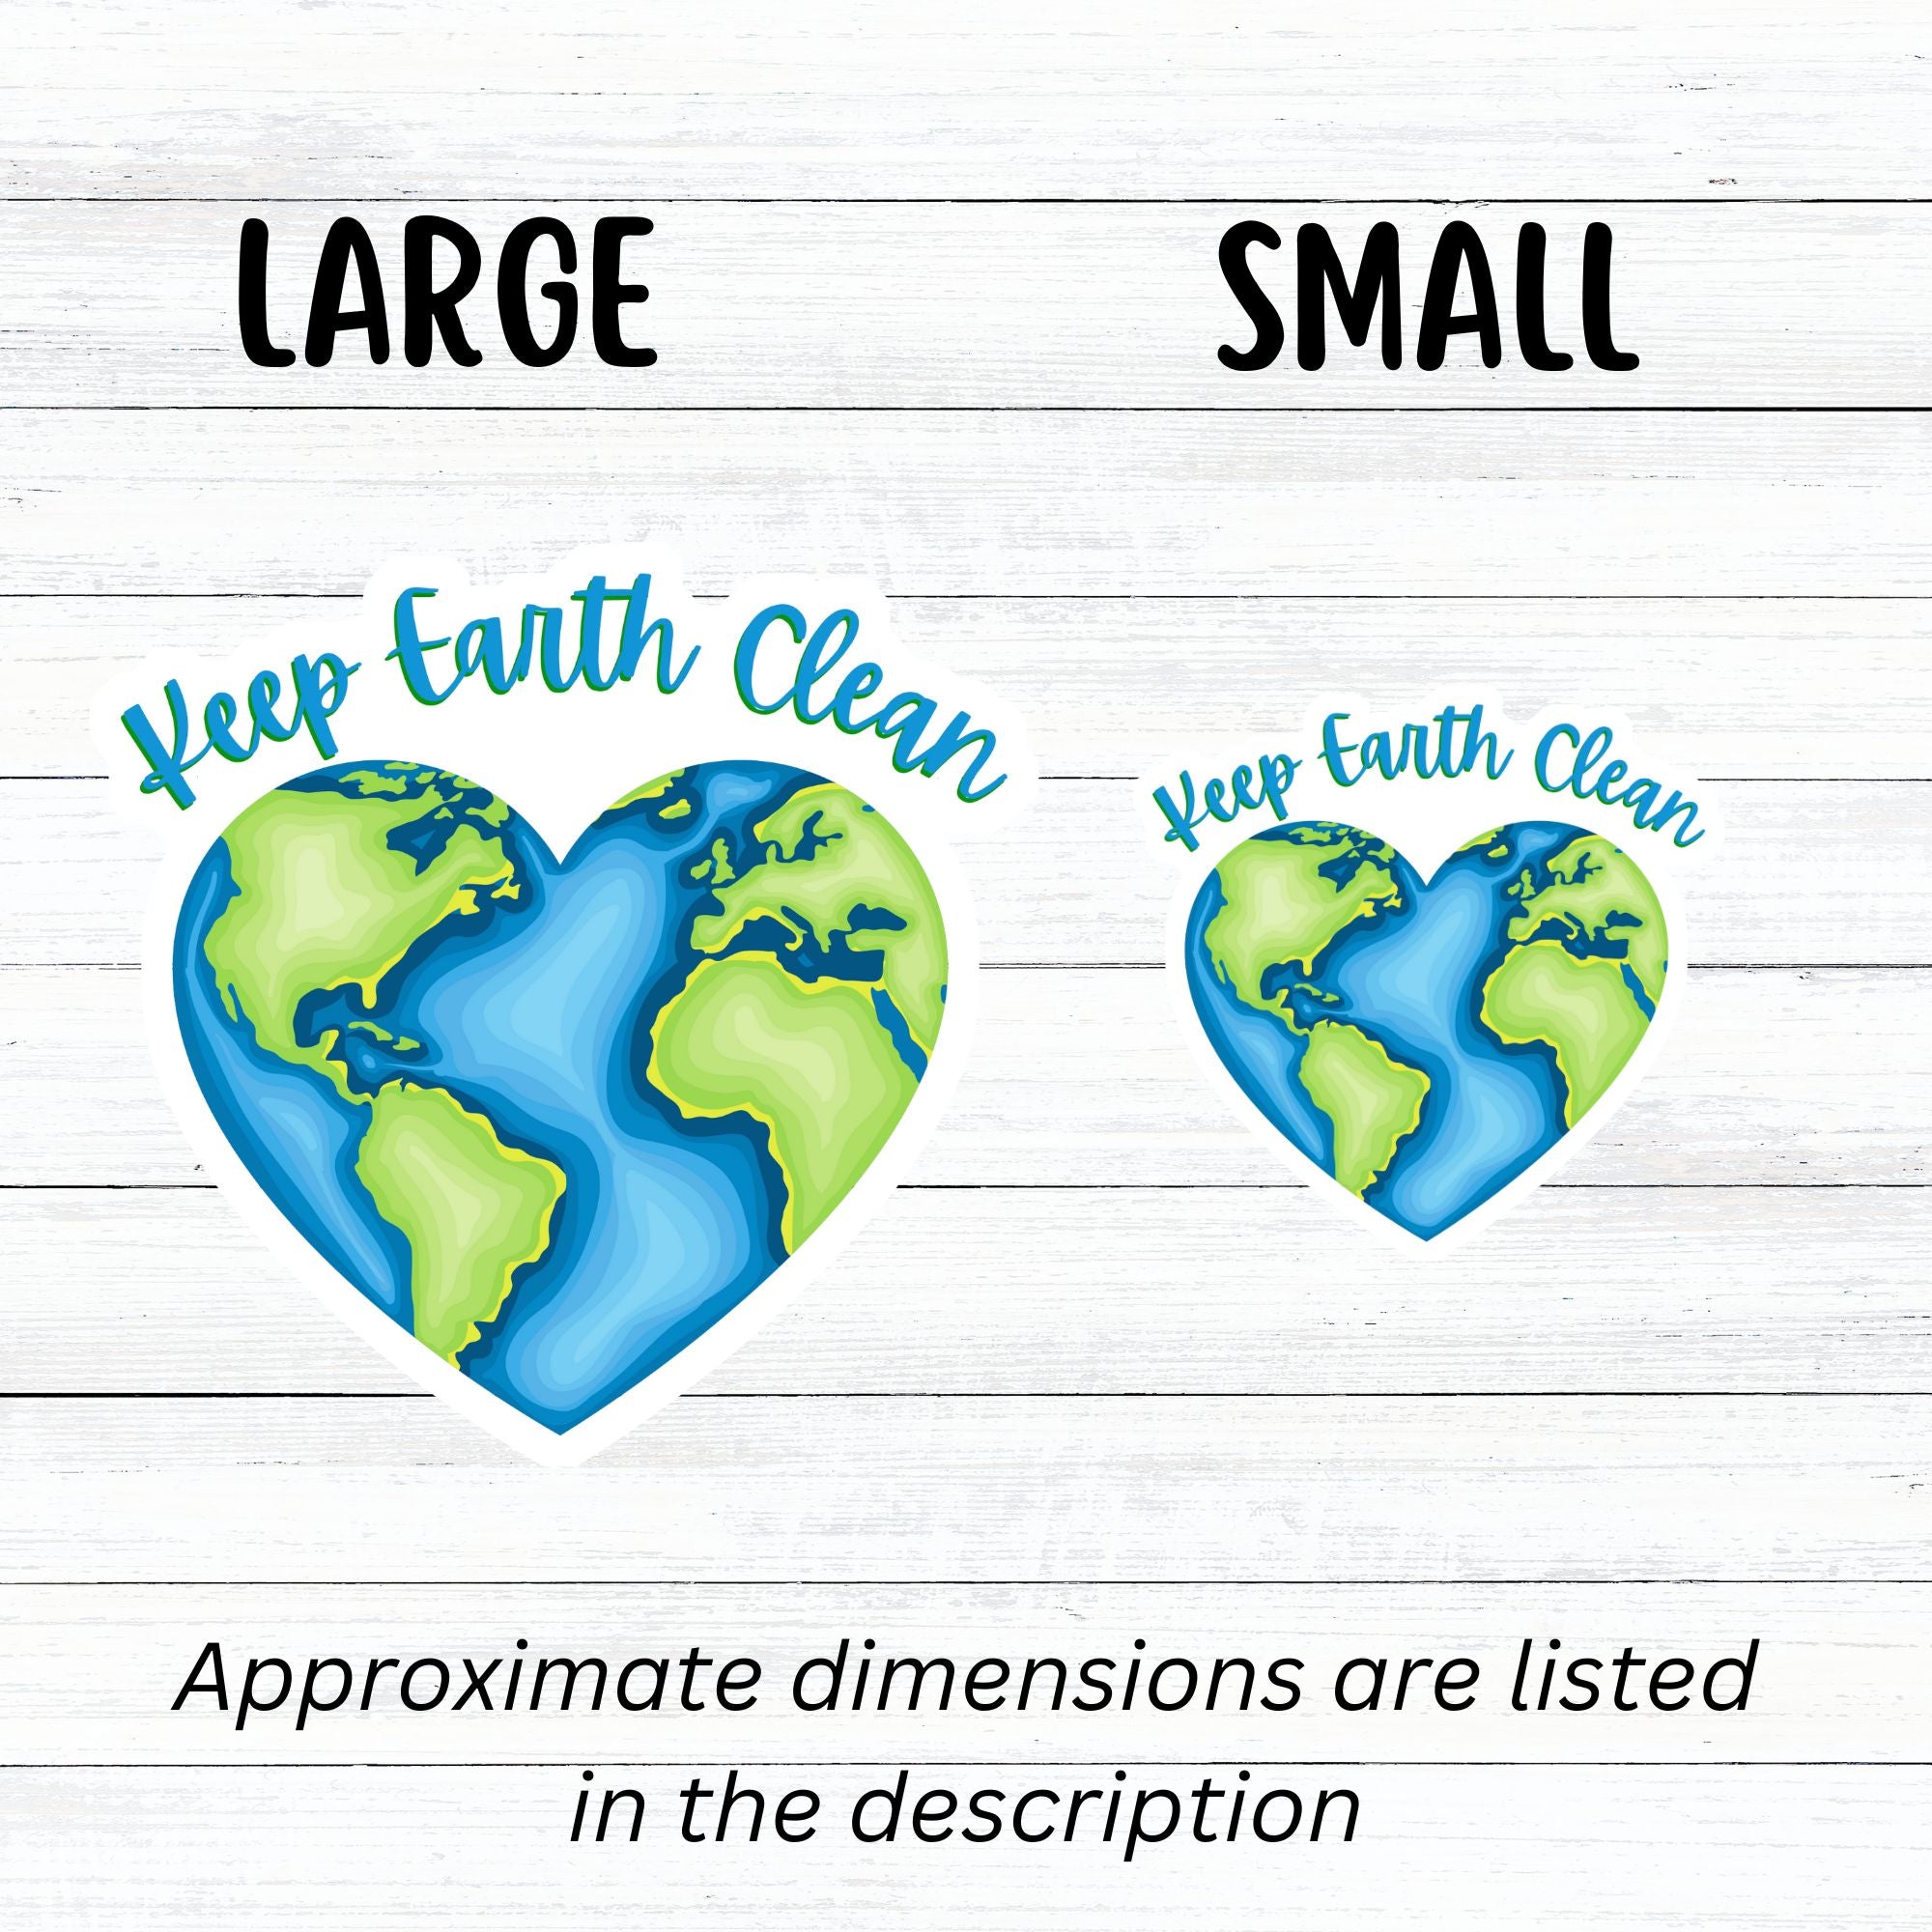 Keep Earth Clean, it's the only home we have! This individual die-cut sticker features the earth in a heart shape with Keep Earth Clean written above. Check out our Inspirational collection for more inspiring stickers! This image shows large and small Keep Earth Clean stickers next to each other.